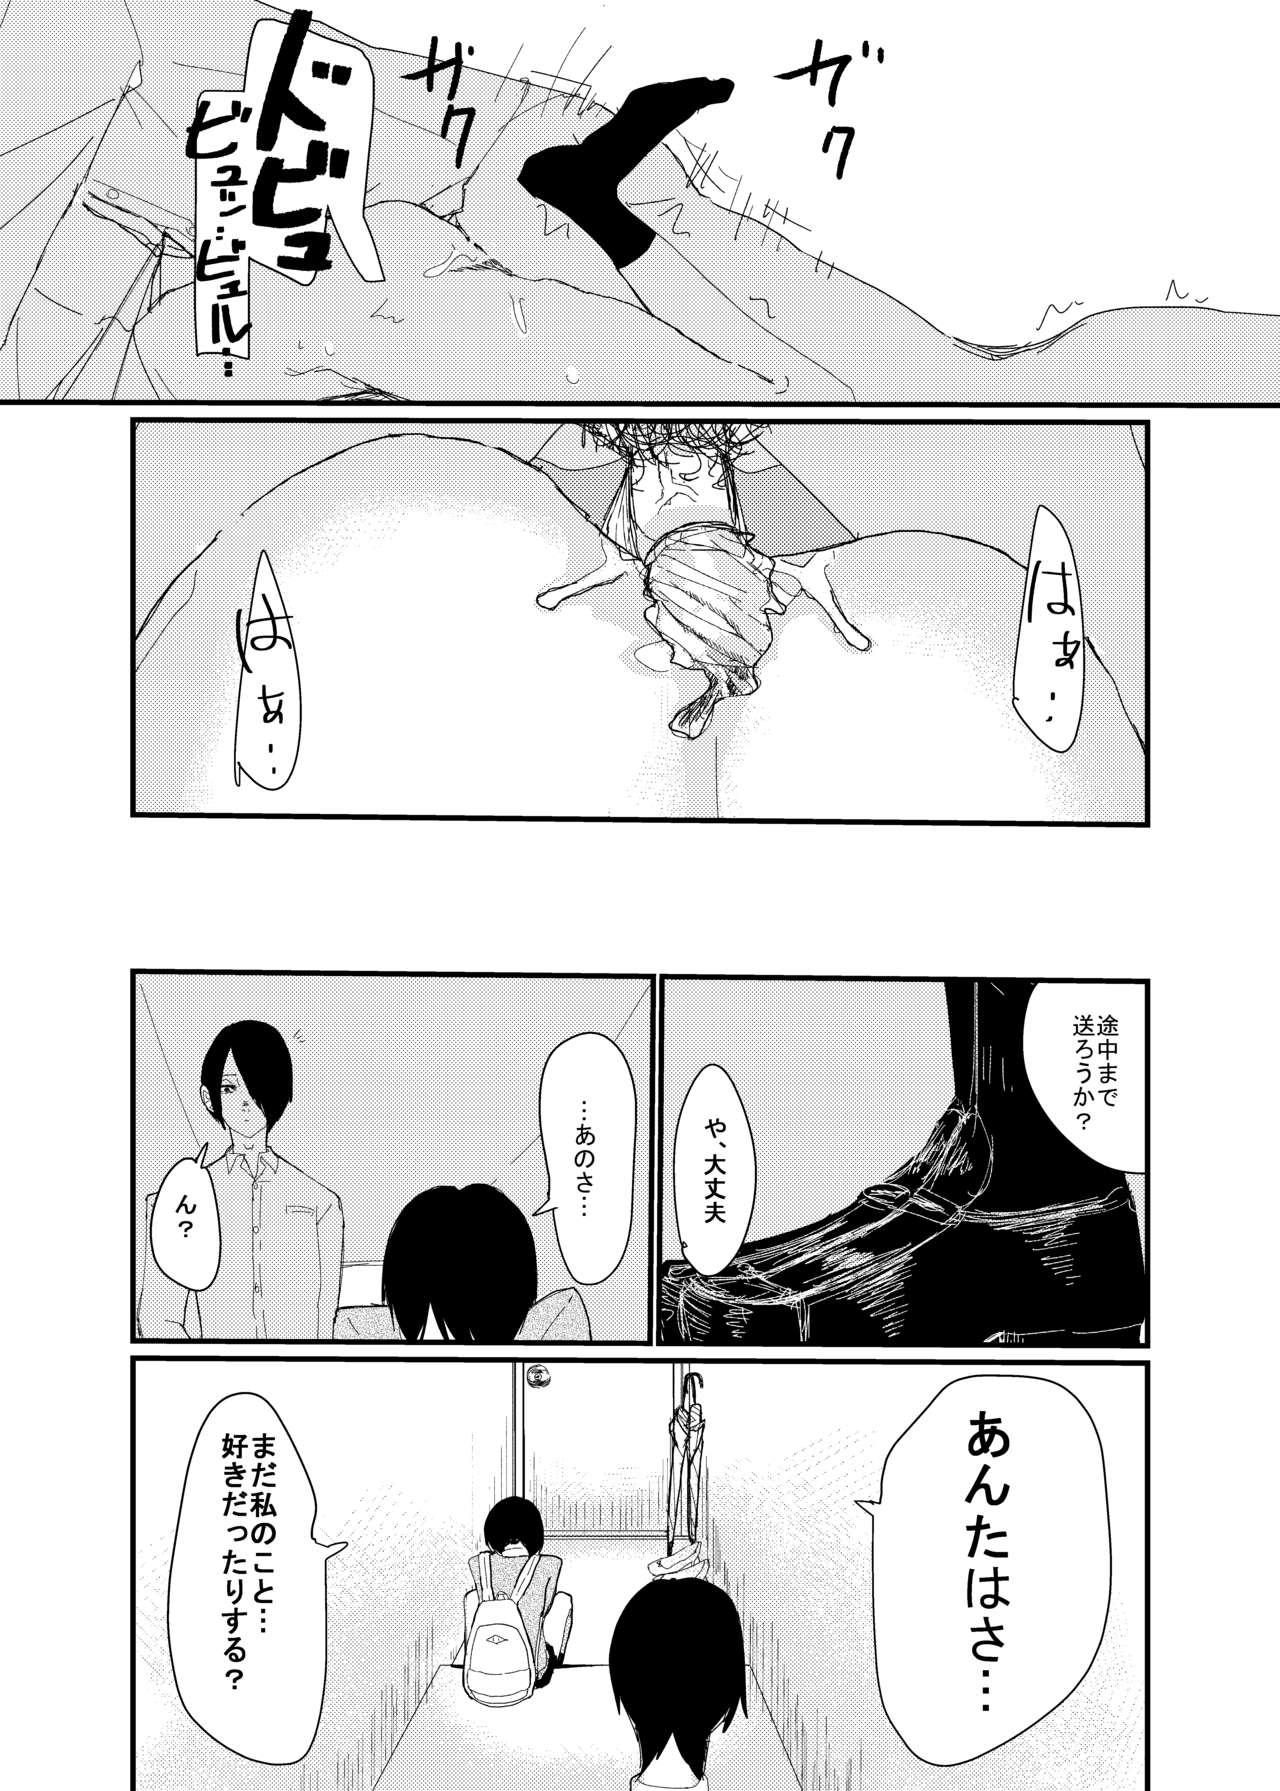 From 前描いたエロ漫画 Oldvsyoung - Page 17